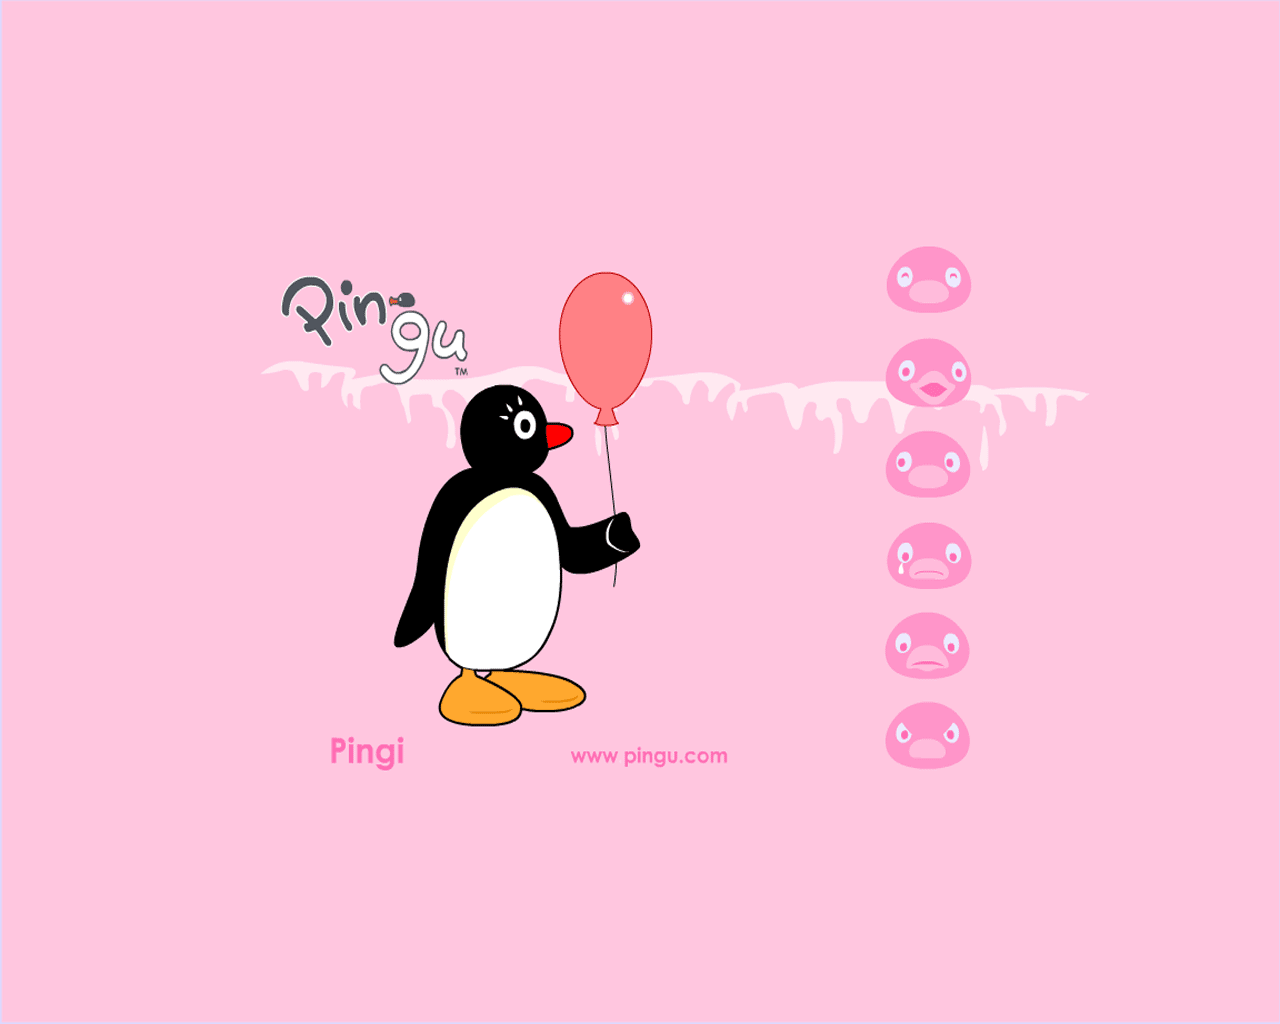 Heres Remembering Pingu The Penguin Who Was An Unforgettable Part Of Our  Childhood  ScoopWhoop